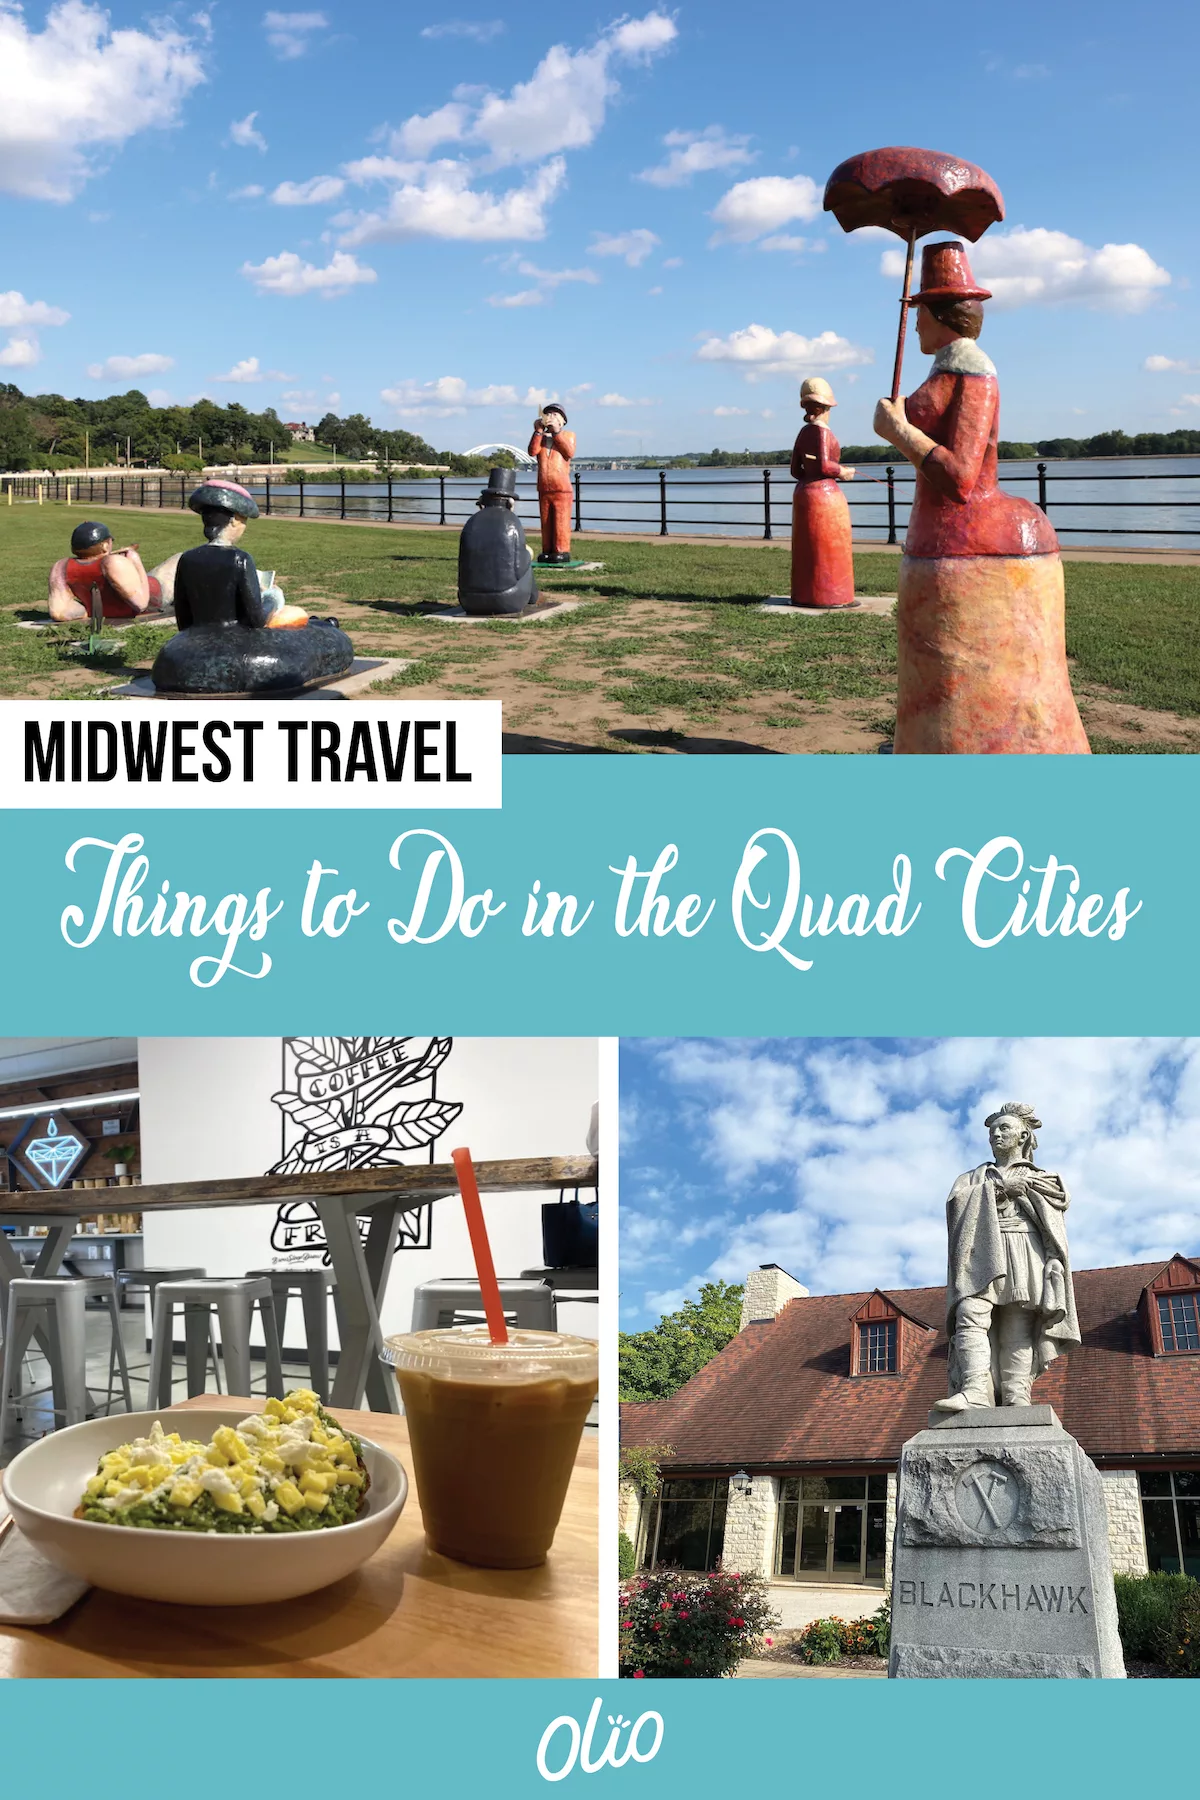 Discover all of the things to do in the Quad Cities with a weekend getaway! From amazing outdoor spaces to delicious dining options to artistic accommodations, these Iowa and Illinois communities are teeming with hidden gems. Find things to do, places to eat and where to stay in the Quad Cities to make your next Midwest getaway a memorable one!